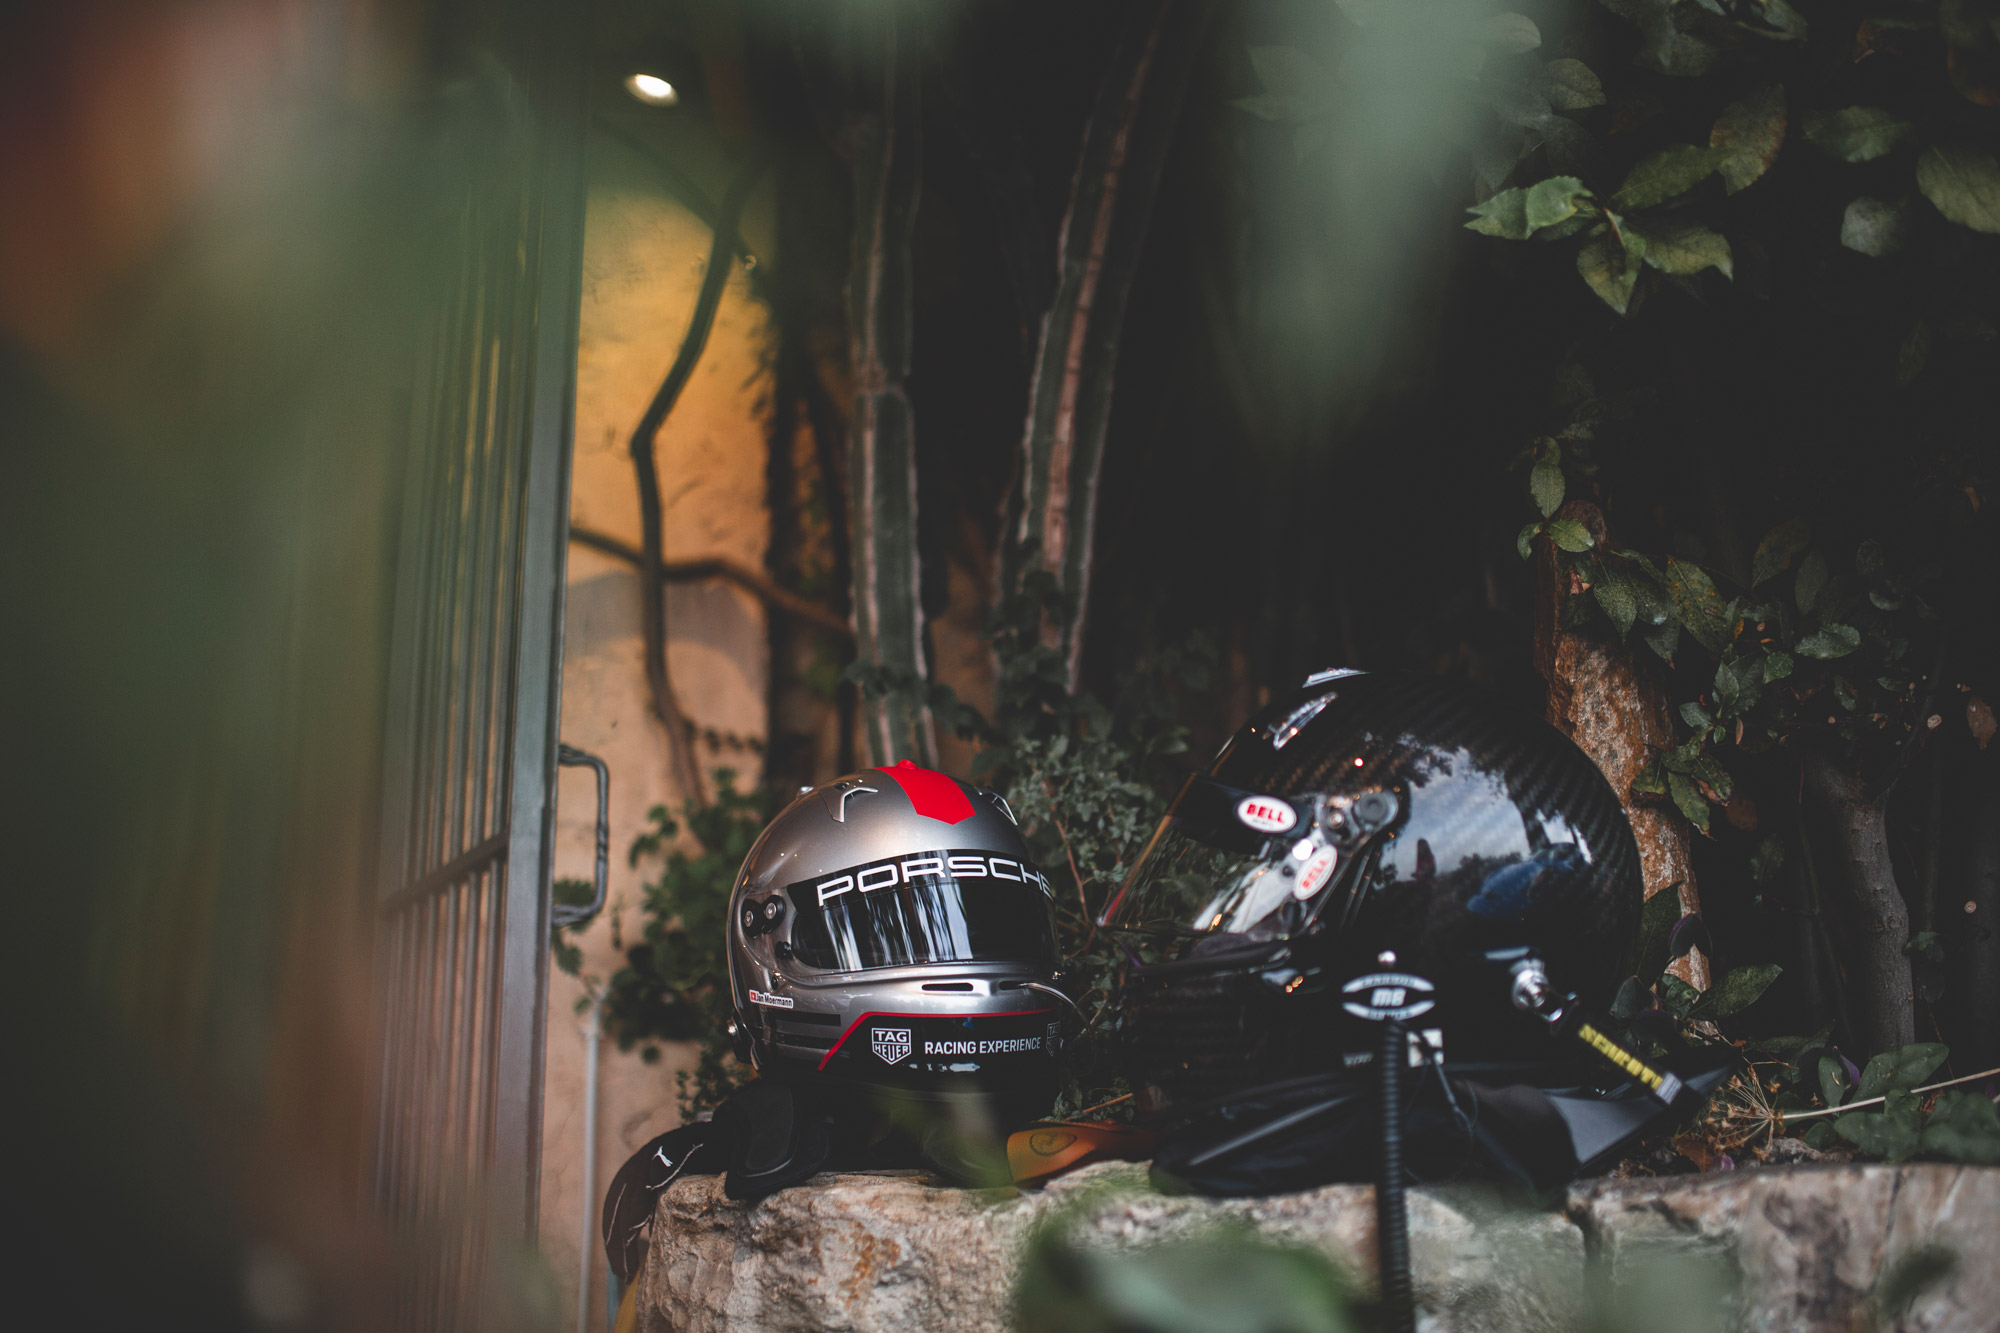 Two Porsche racing helmets placed on restaurant wall